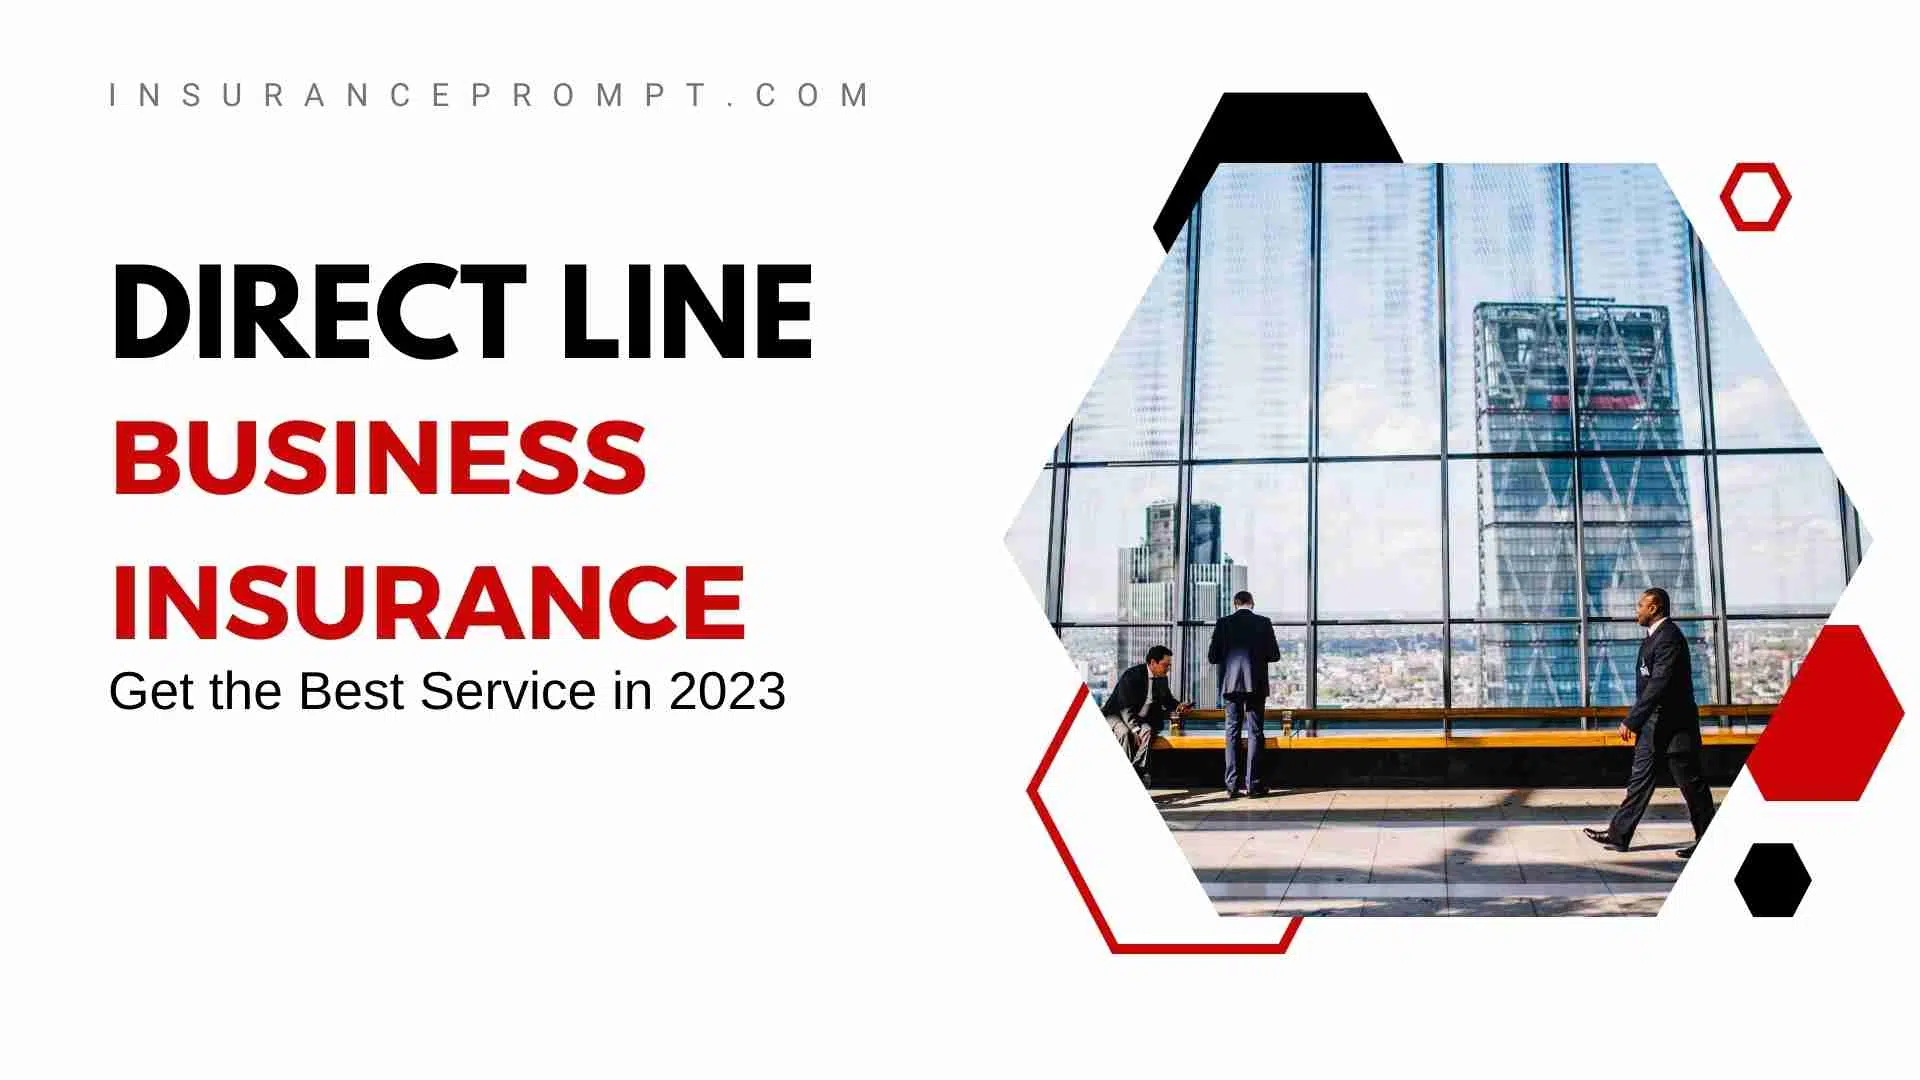 Direct Line Business Insurance 2023: Flexible Policies